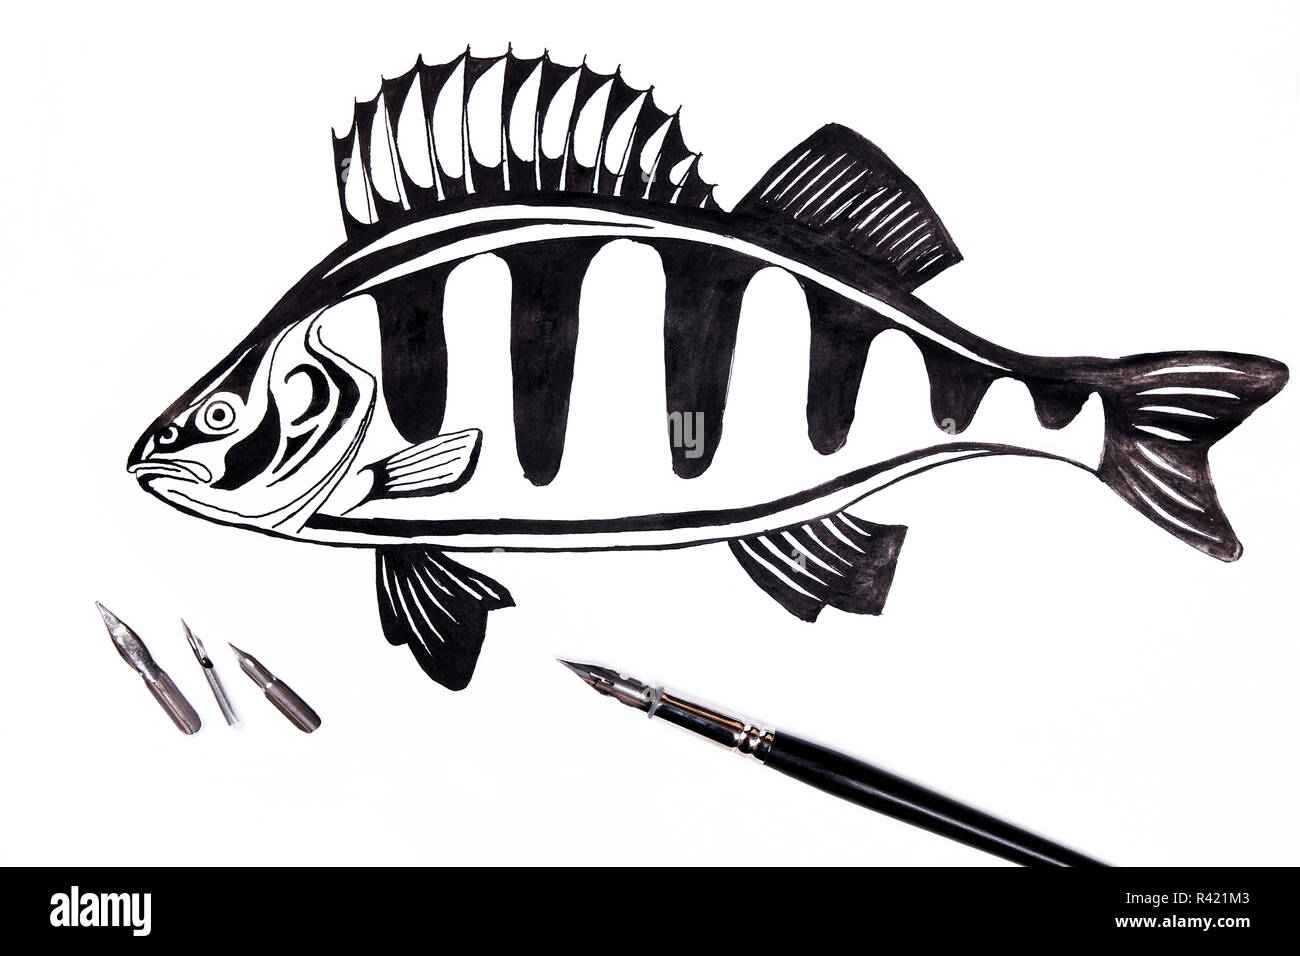 How to Draw a Perch With White Ink on Black Paper